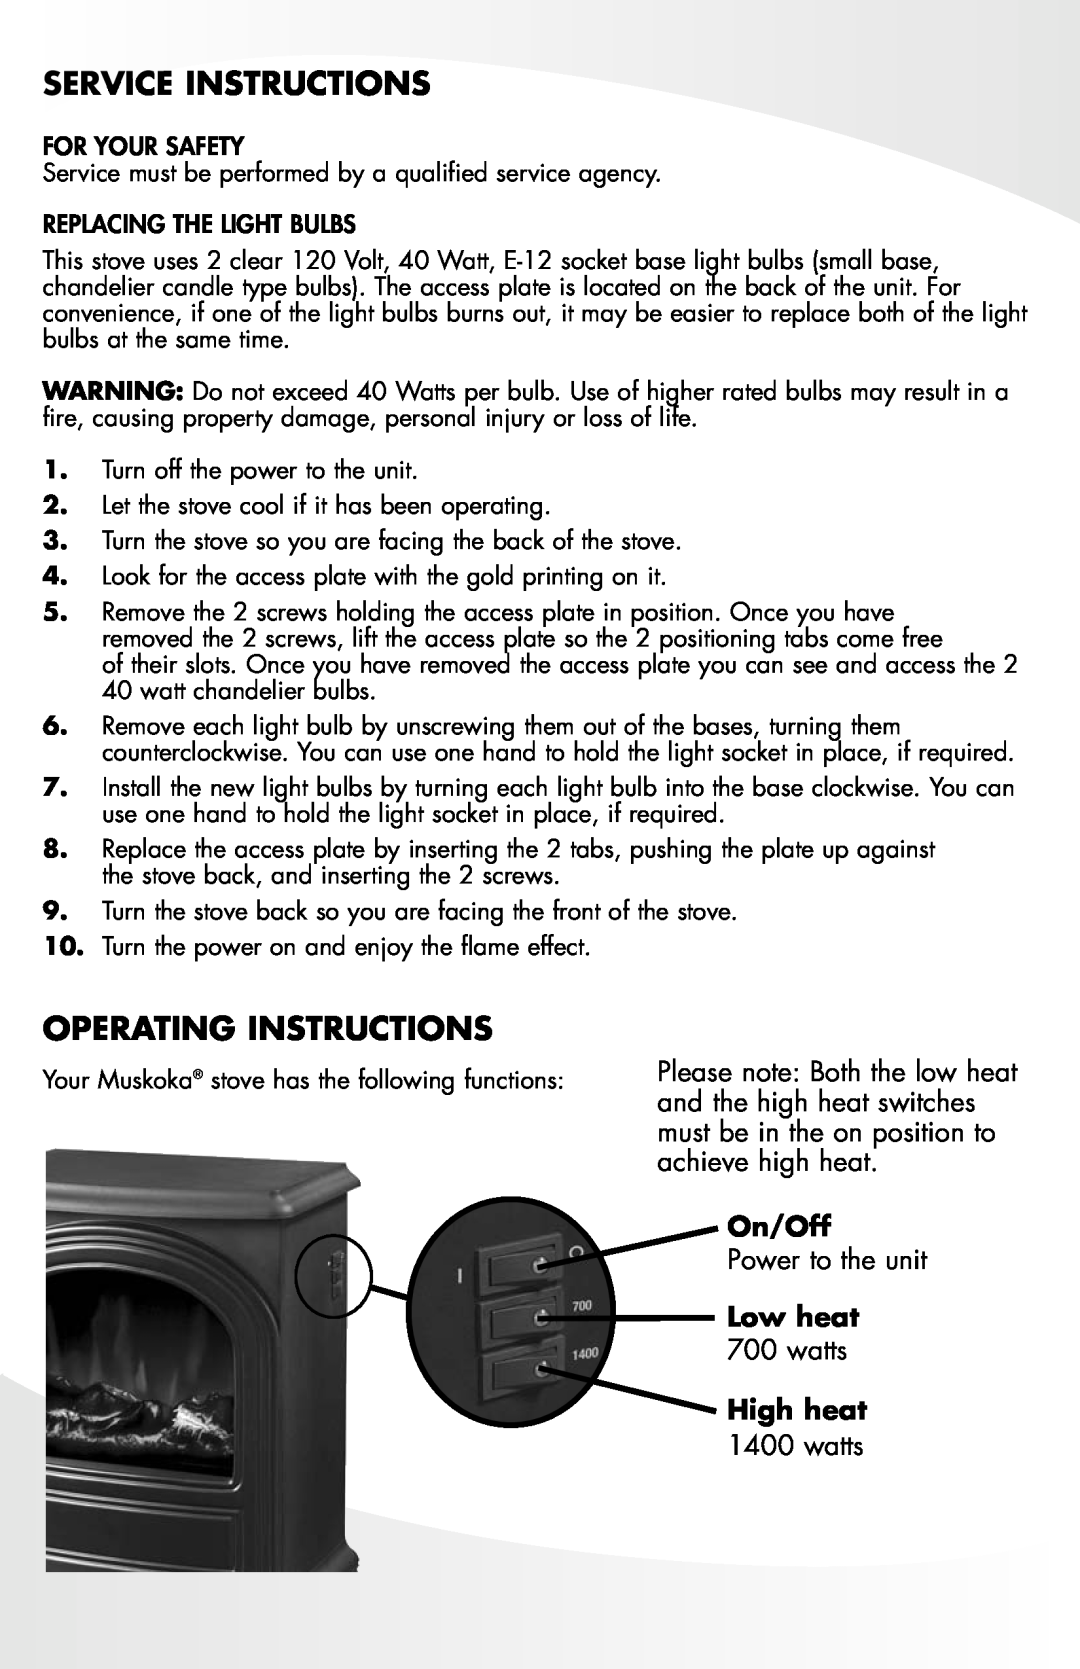 Greenway Home Products MES12BL Service Instructions, Operating Instructions, Power to the unit, watts, On/Off, Low heat 